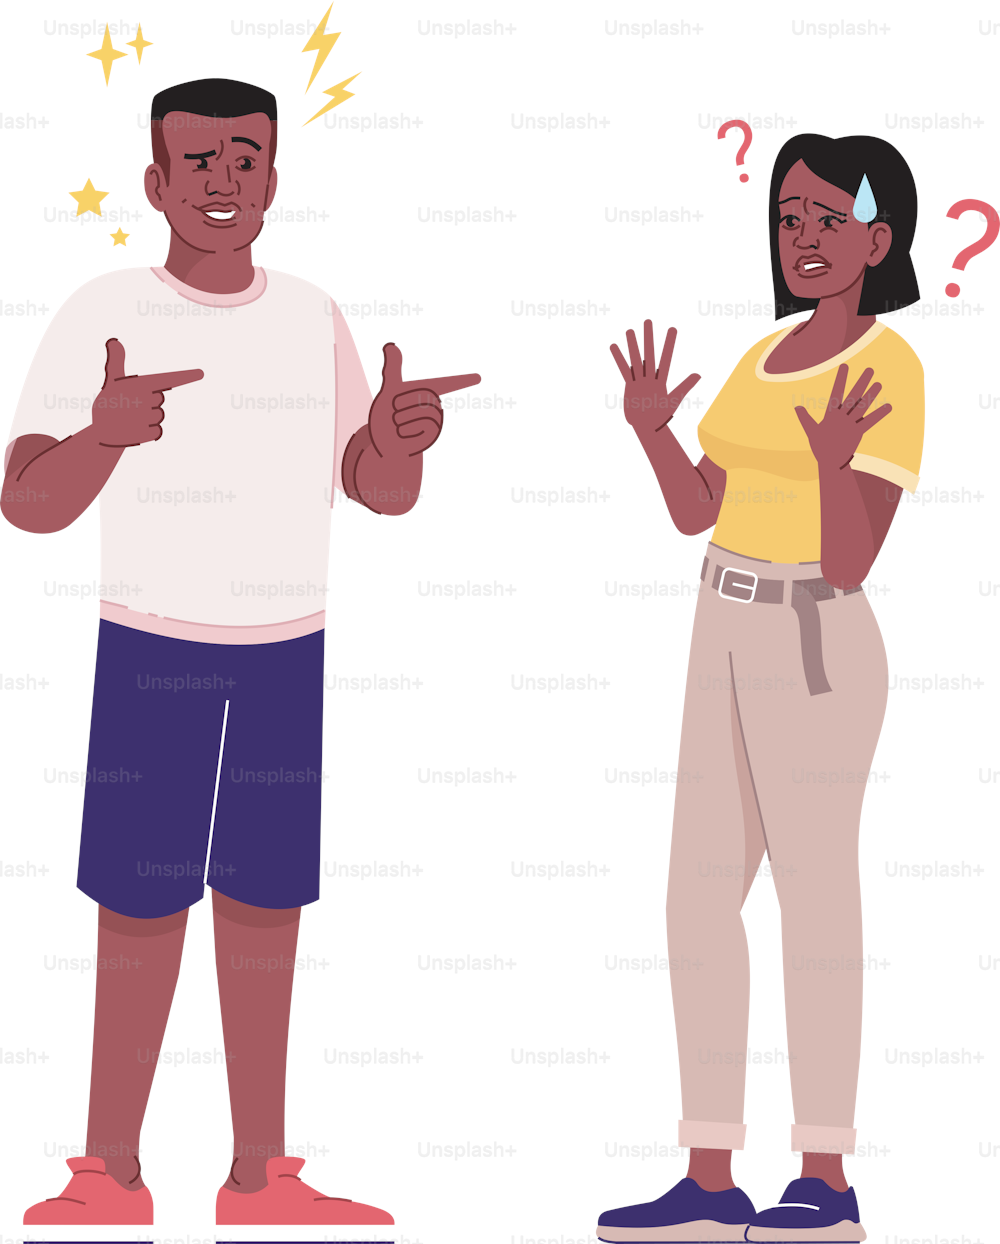 Unwanted attention flat vector illustration. Annoying flirt. Persecution, harassment. Flirting man, refusing woman isolated cartoon characters with outline elements on white background